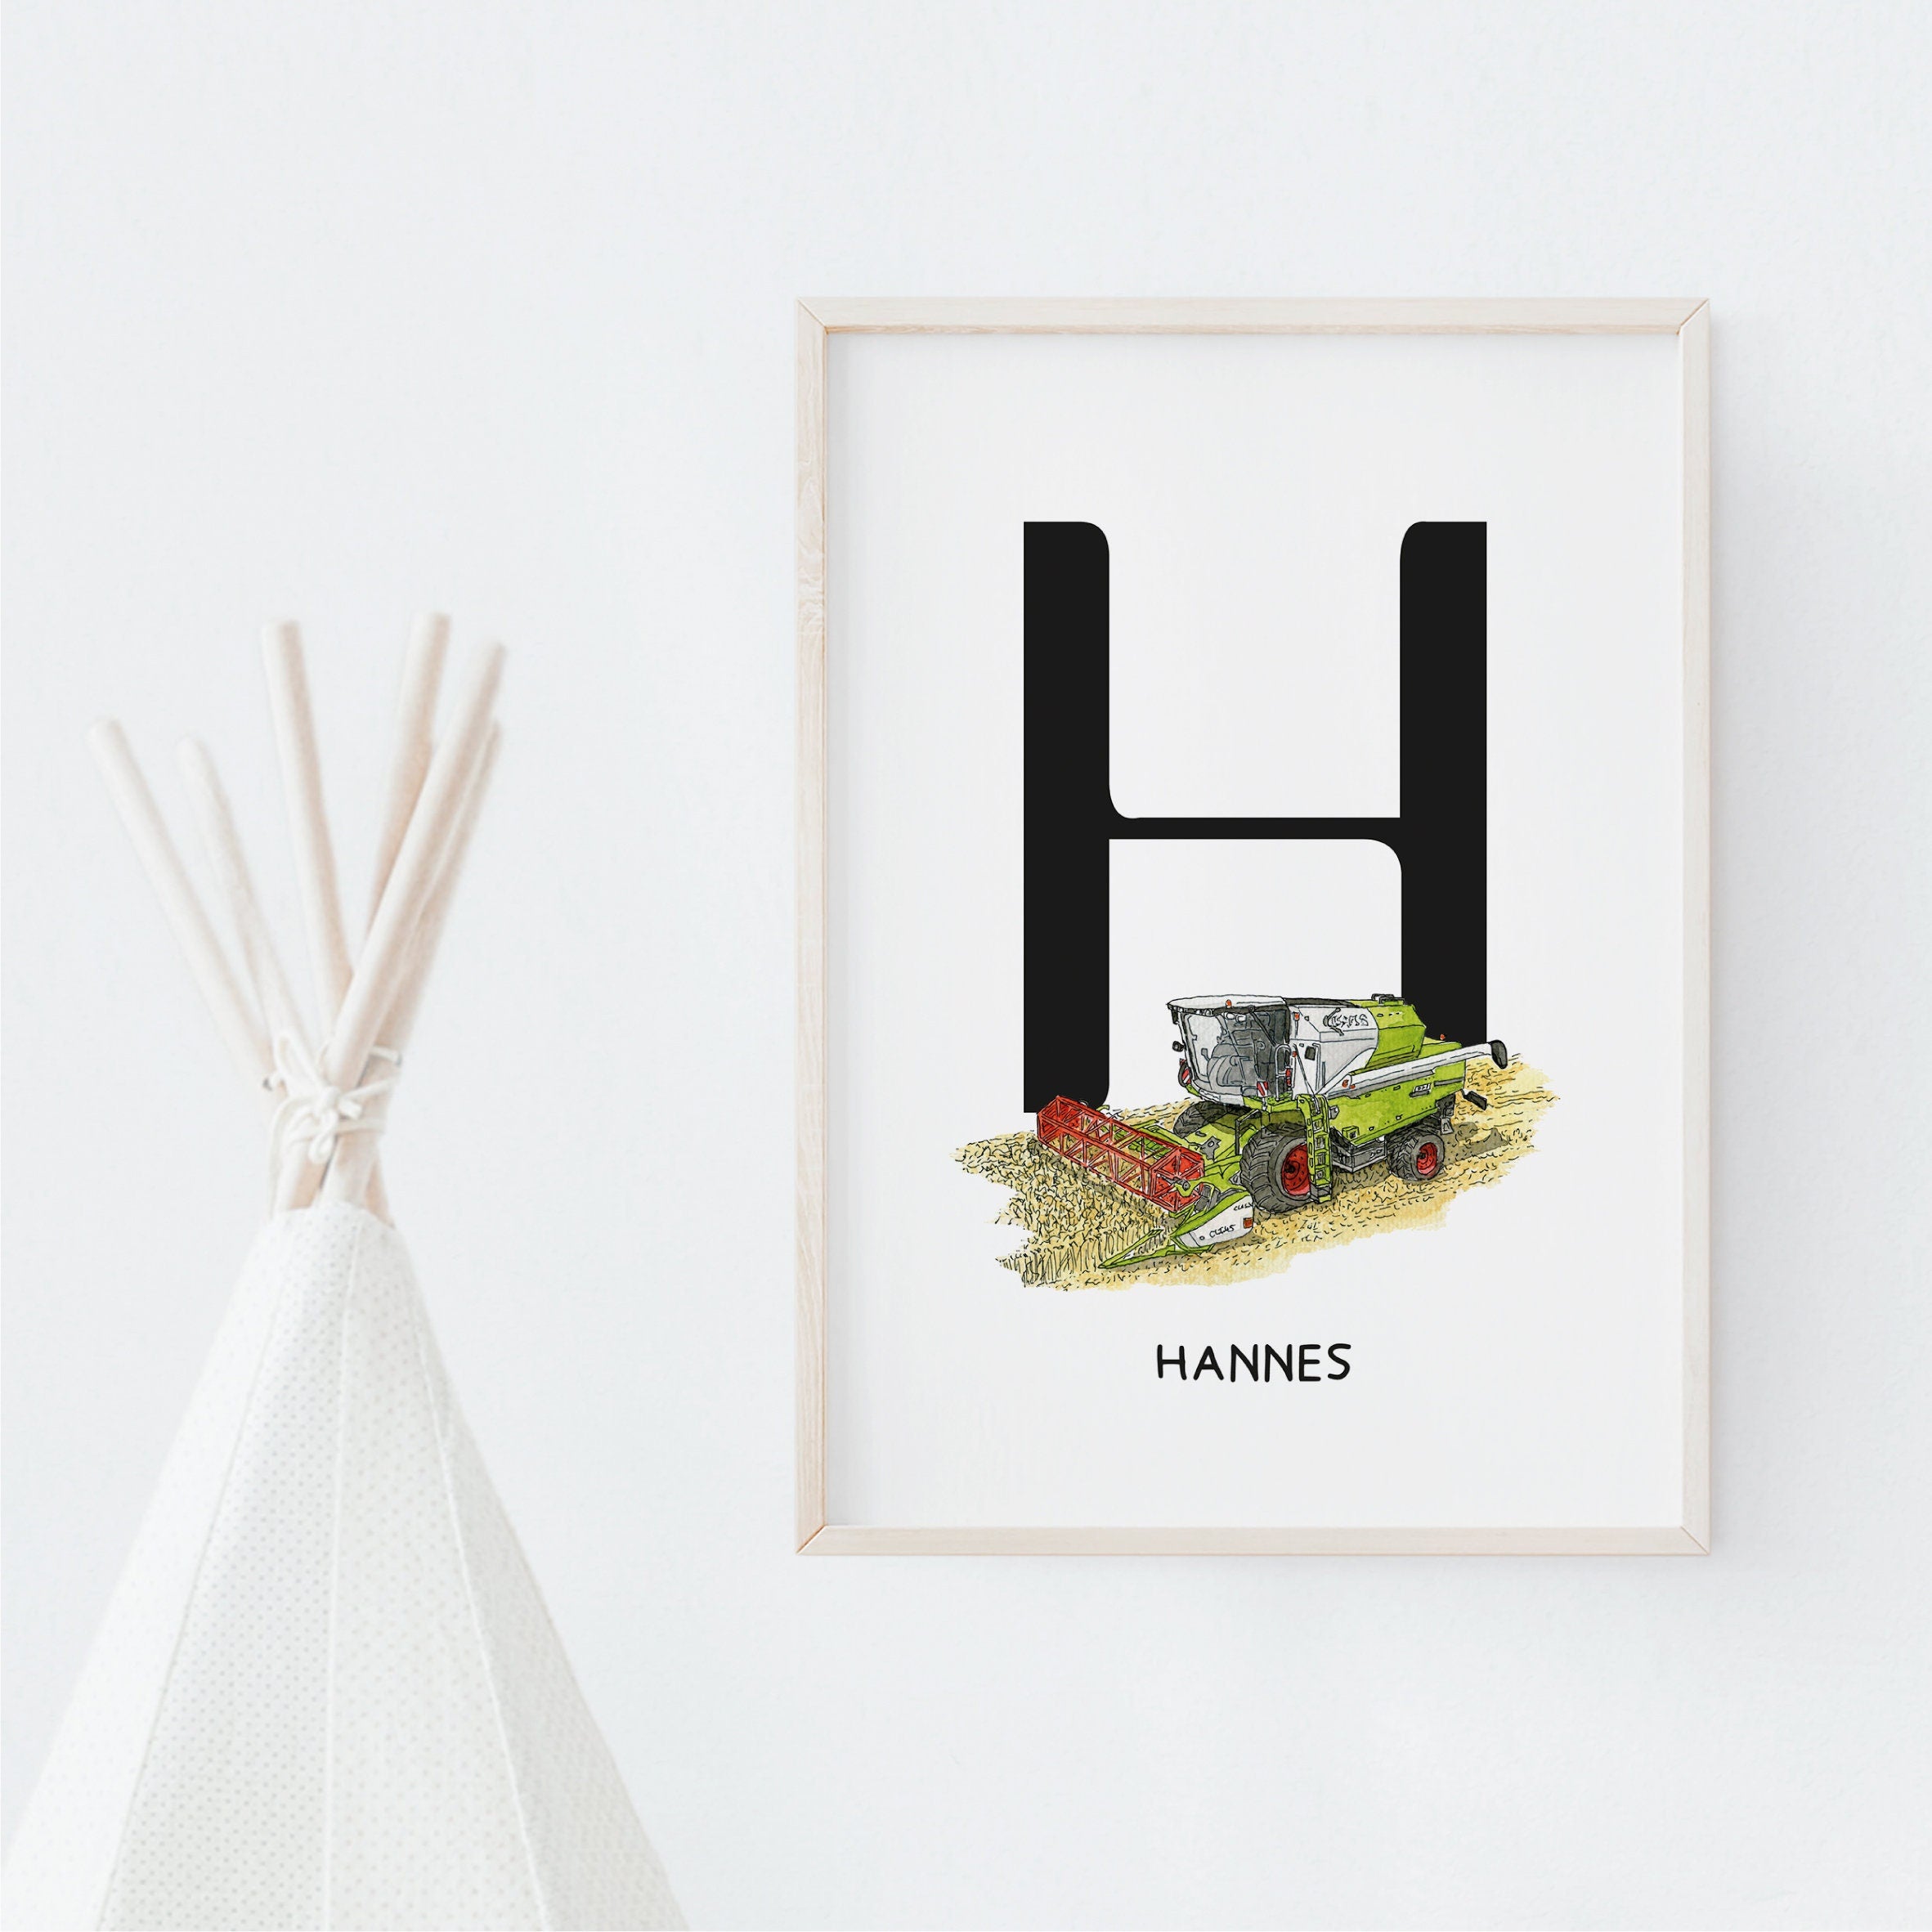 Vehicle Poster - Combine Harvester | Personalized poster for the children's room